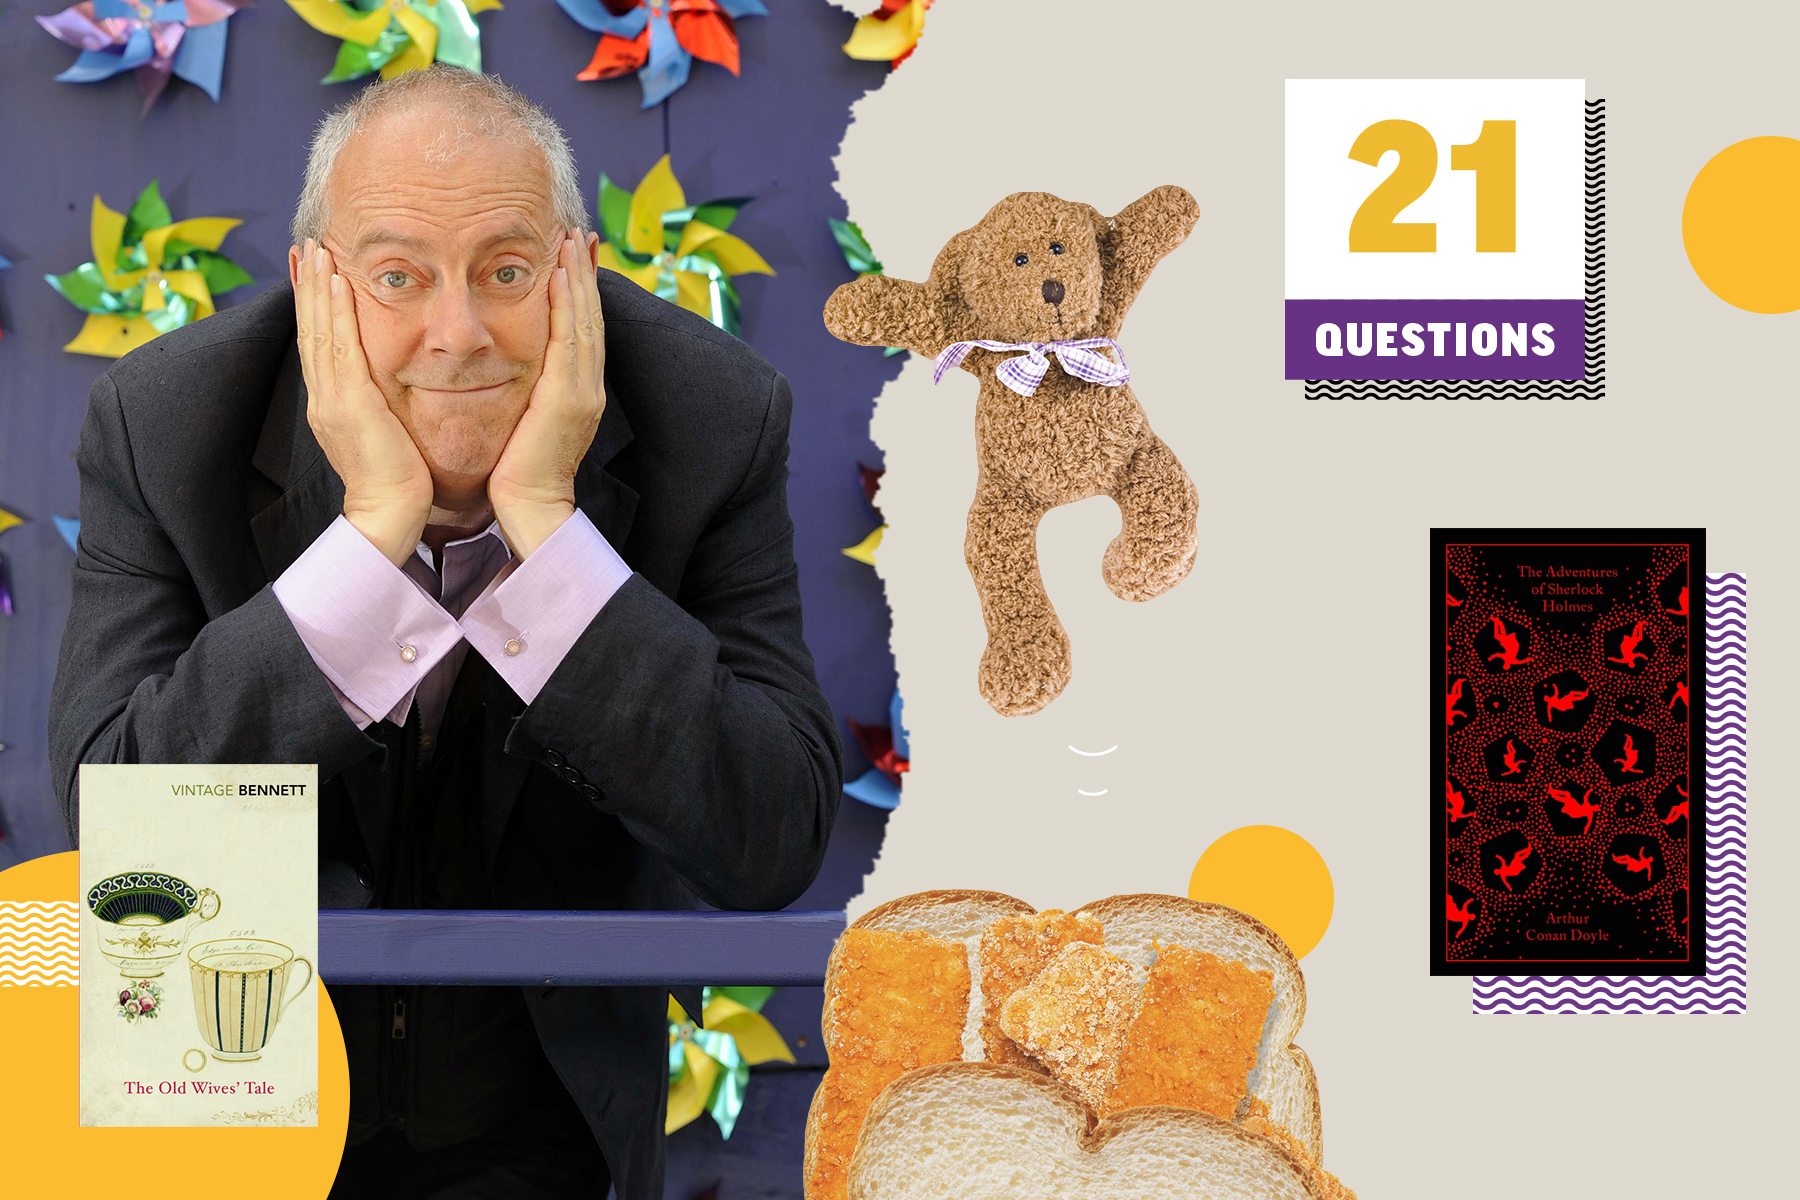 An image of author Gyles Brandreth leaning on his hands in front of a purple background with colourful pinwheels. Next to him is a collage that includes a teddy bear, The Adventures of Sherlock Holmes clothbound classic, The Old Wive's Tale and a fish finger sandwich.